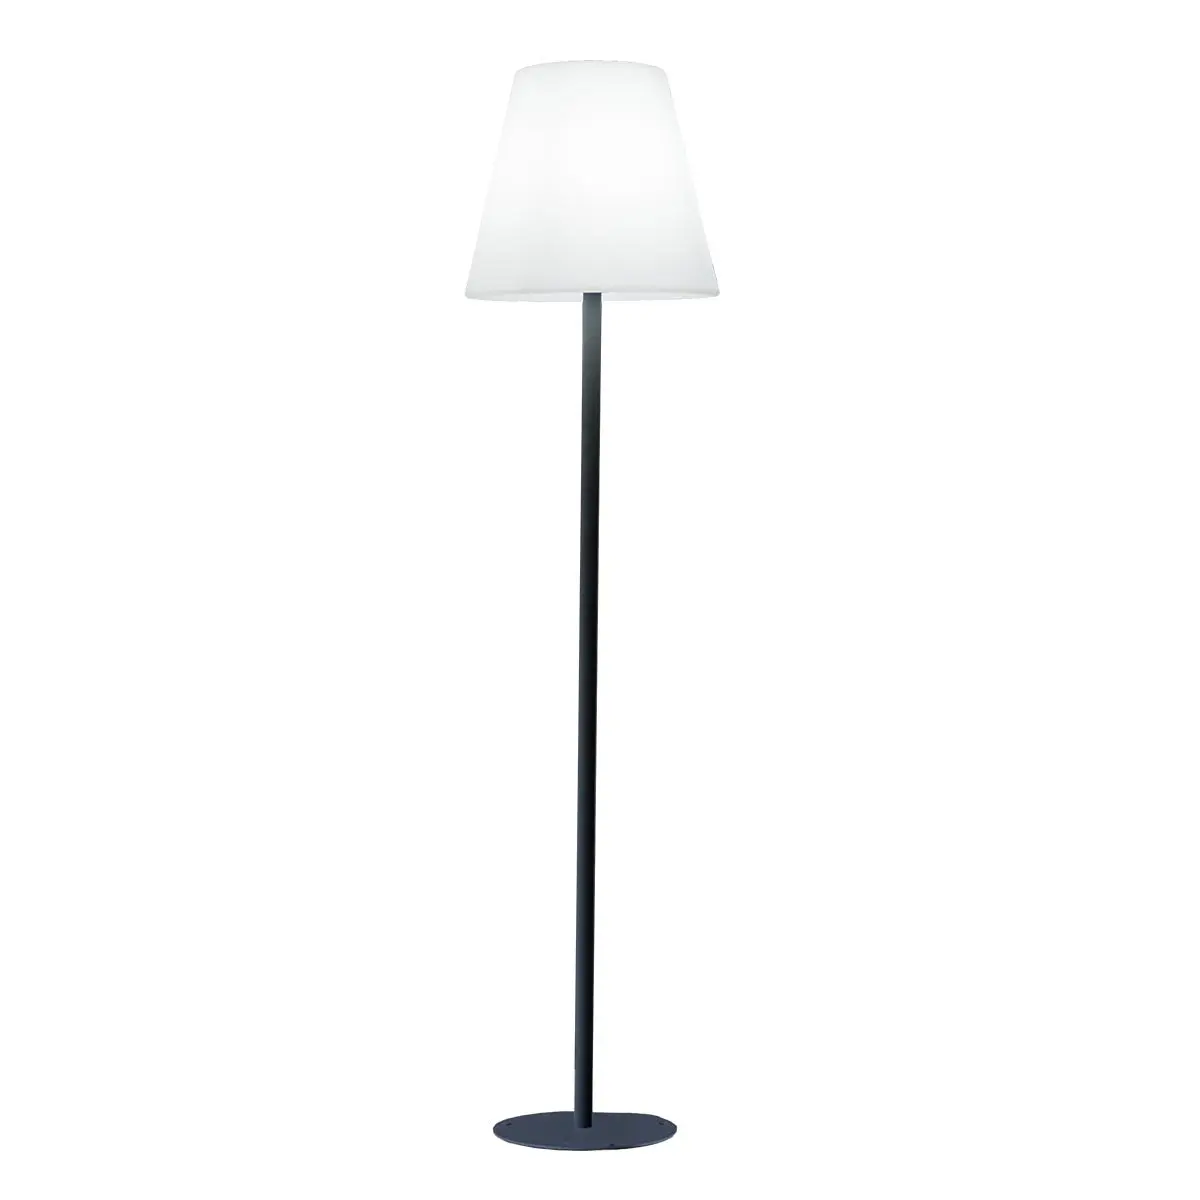 dimmbare STANDY Kabellose LED-Stehlampe